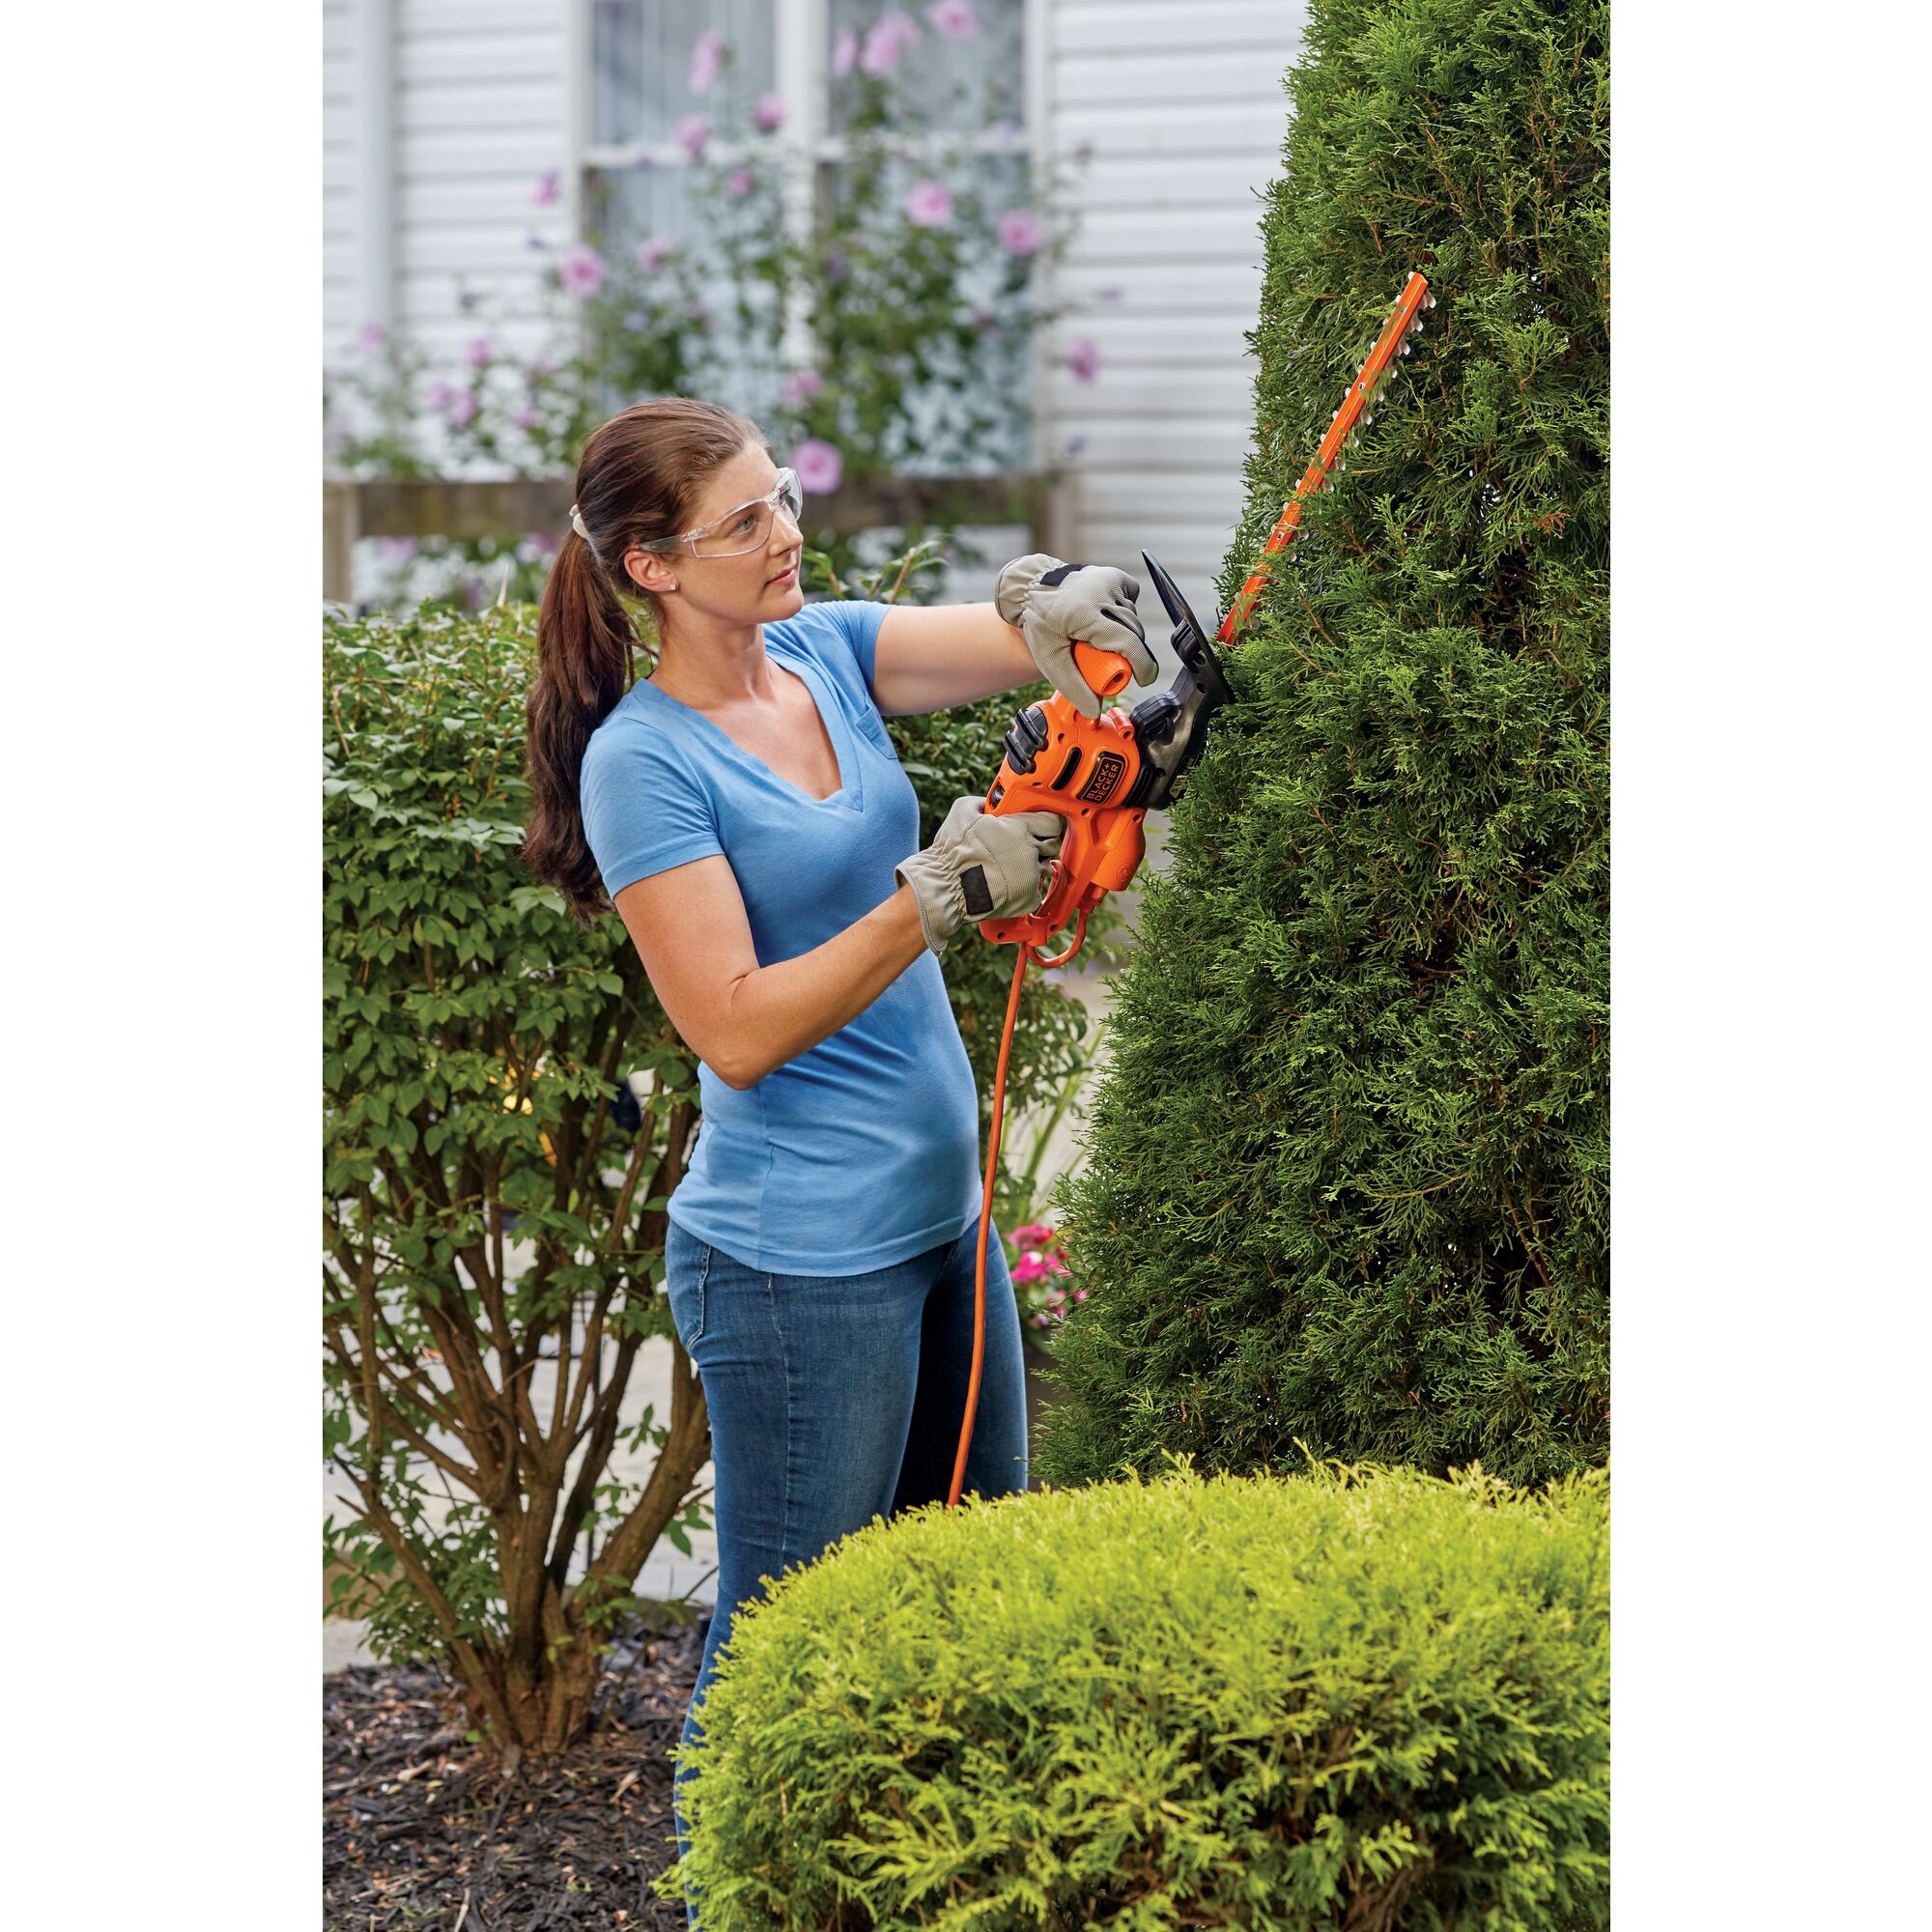 17 inch Electric Hedge Trimmer being used by person to trim hedge outdoors.